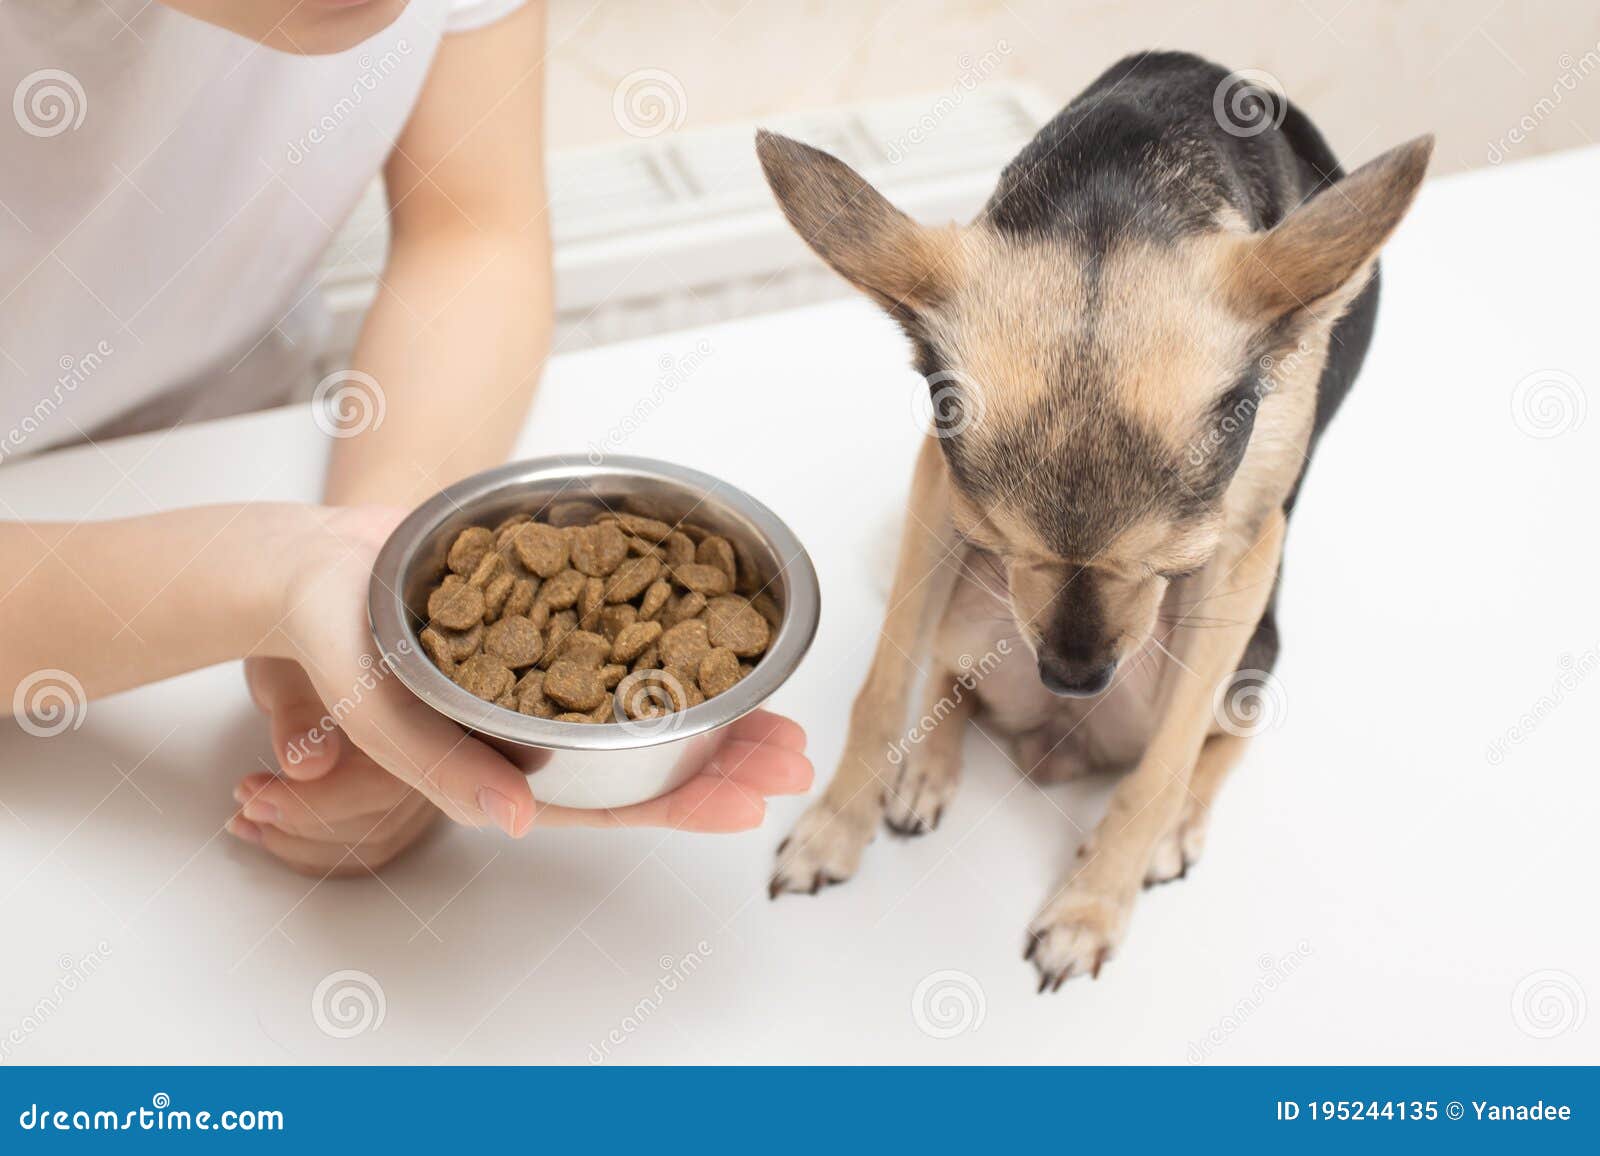 what can i feed my dog with no appetite